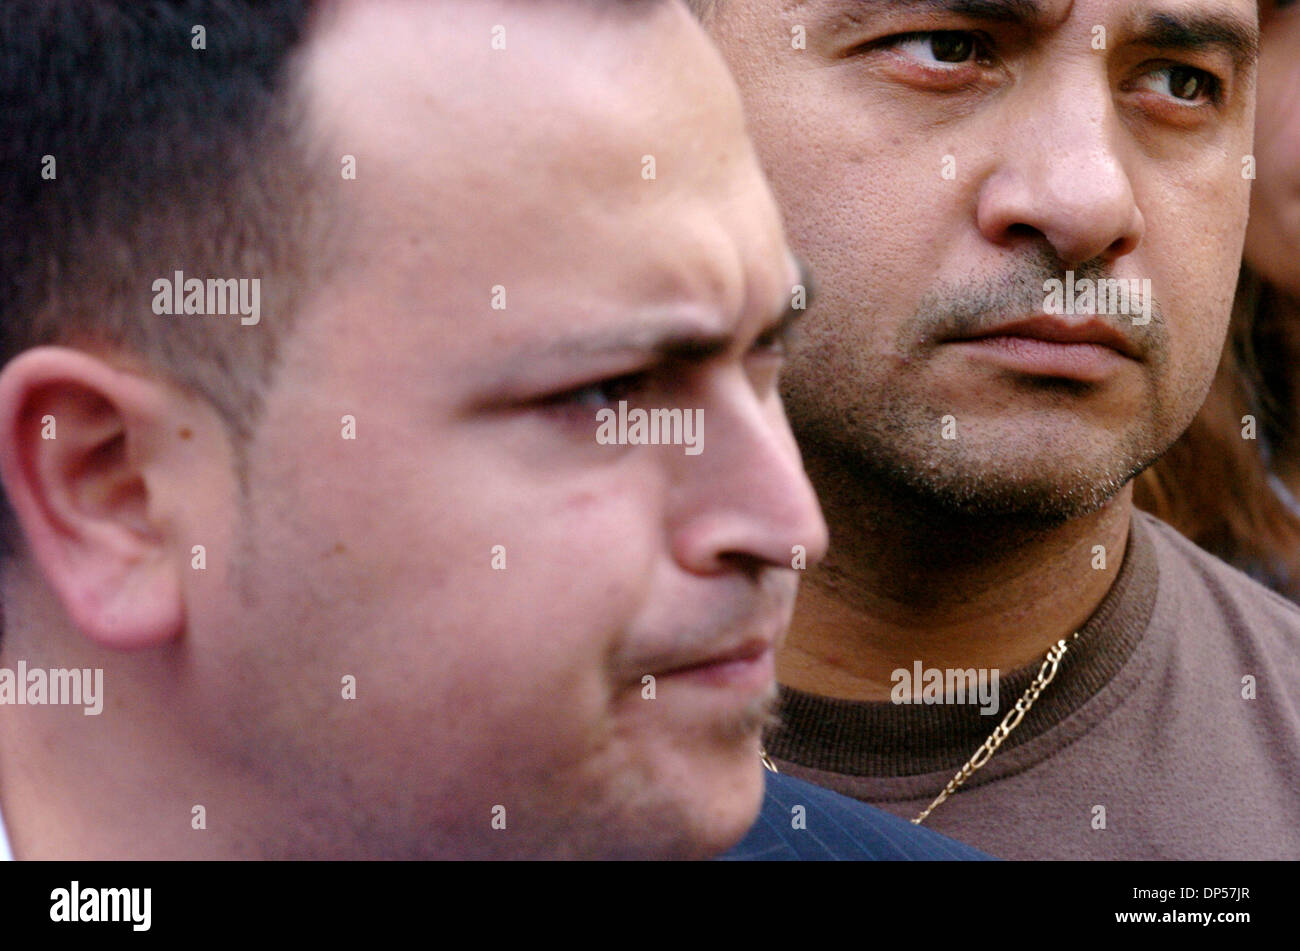 Sep 06, 2006; Manhattan, NY, USA; Former U.S. Army soldiers JERRY OJEDA (L) and AUGUSTIN MATOS (R) speak to the media. Former members of the U.S. Army that served in Iraq attend a hearing in Manhattan Federal Court on the validity of a lawsuit they filed in 2005 against the U.S. Government for compensation for their illnesses and medical expenses for 'Gulf War Syndrome' symptoms th Stock Photo